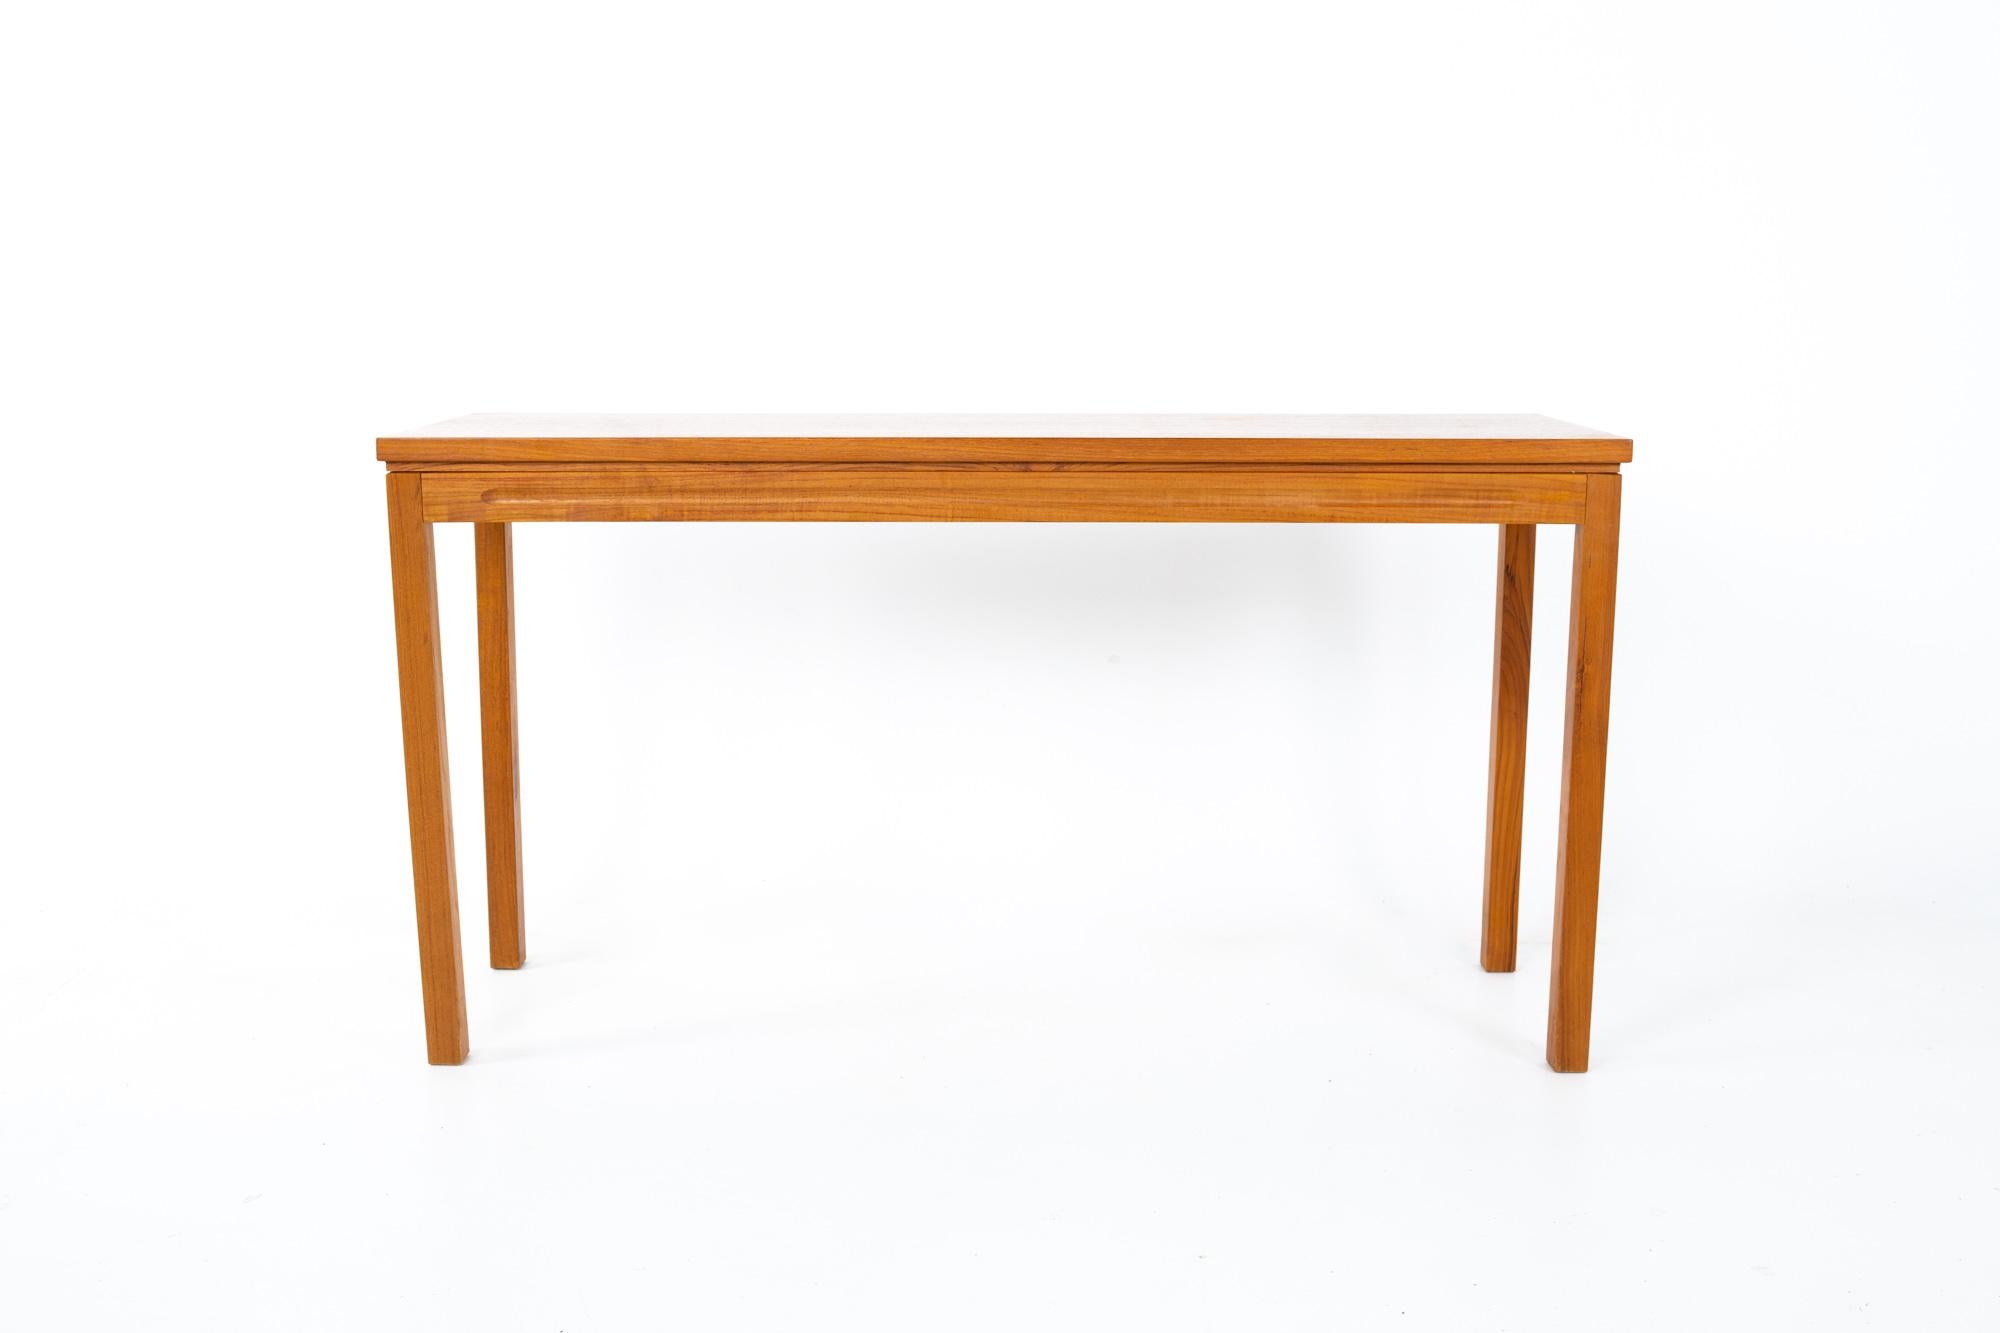 Mid Century teak sofa table foyer entry console.
Console measures: 46.5 wide x 14 deep x 25 inches high

Each piece of furniture is available in what we call restored vintage condition. Upon purchase it is thoroughly cleaned and minor repairs are